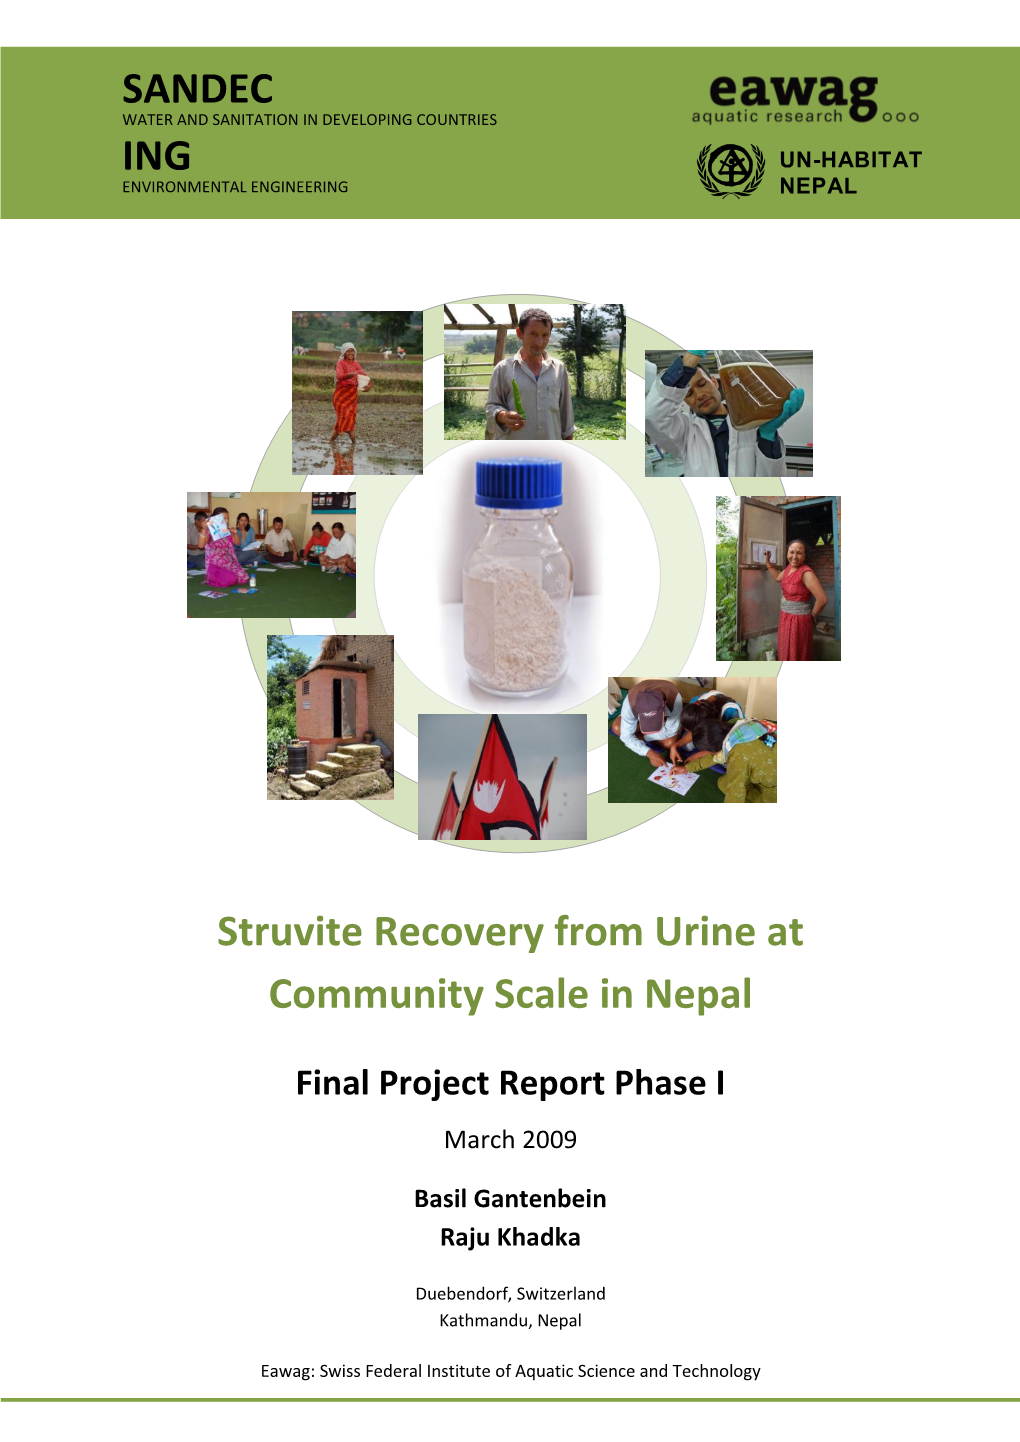 SANDEC ING Struvite Recovery from Urine at Community Scale in Nepal